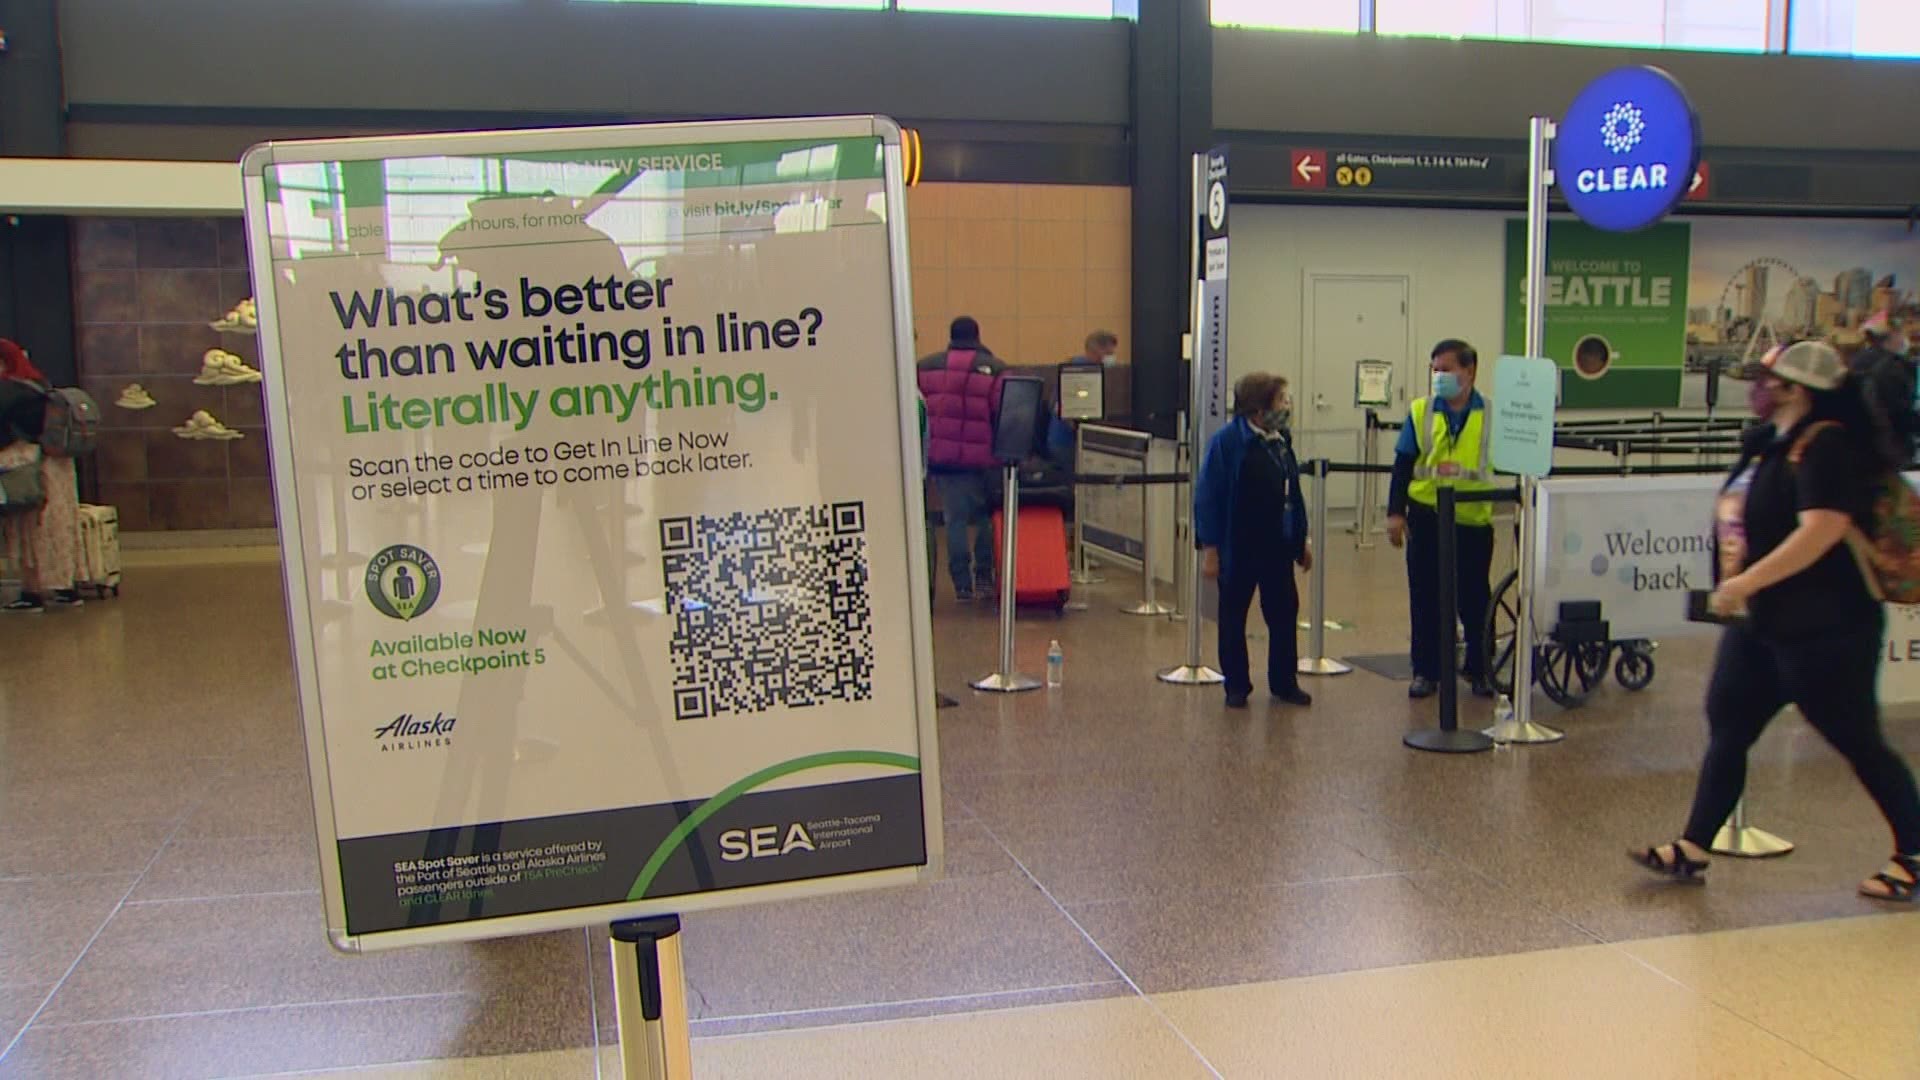 The pilot program applies to some people flying out of Sea-Tac Airport through August. 31